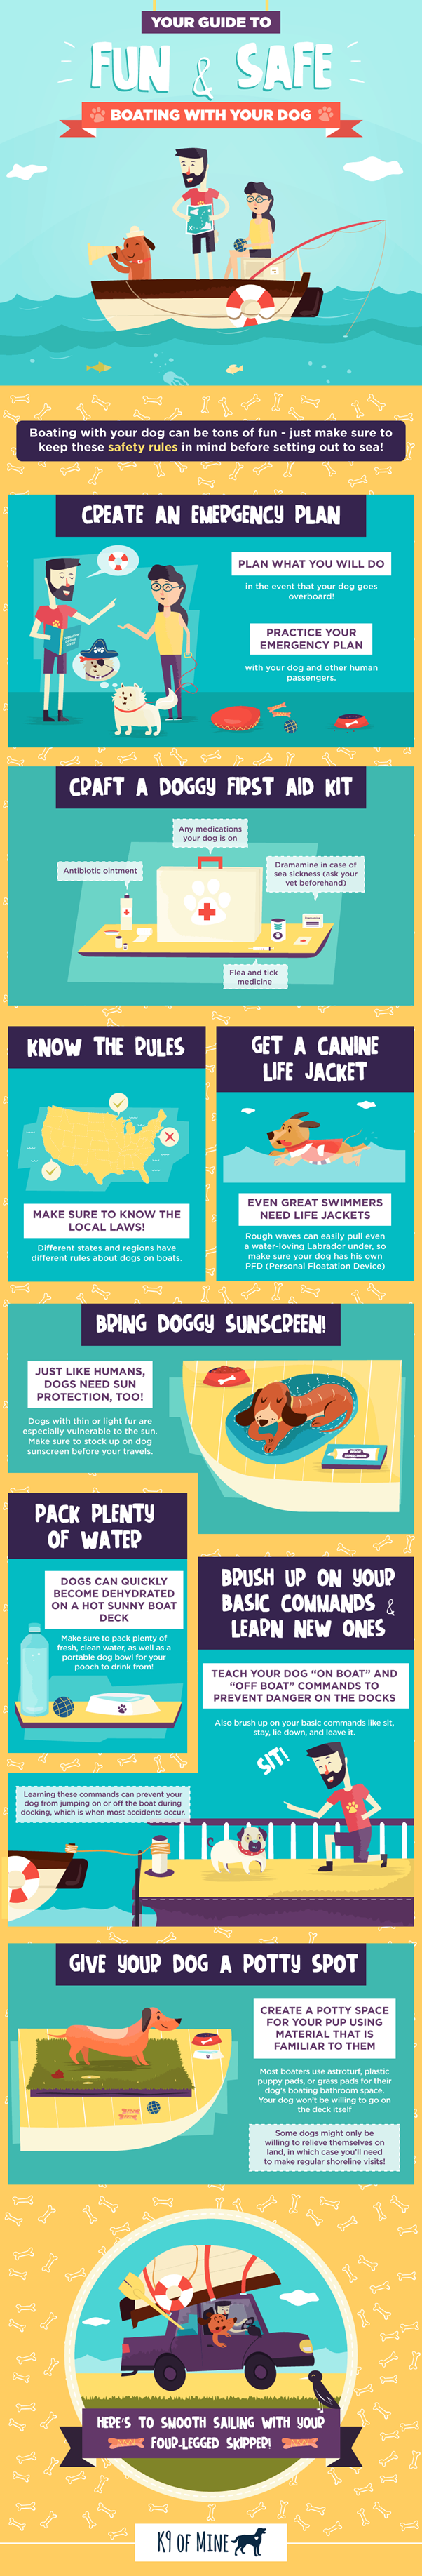 Boating with dog infographic